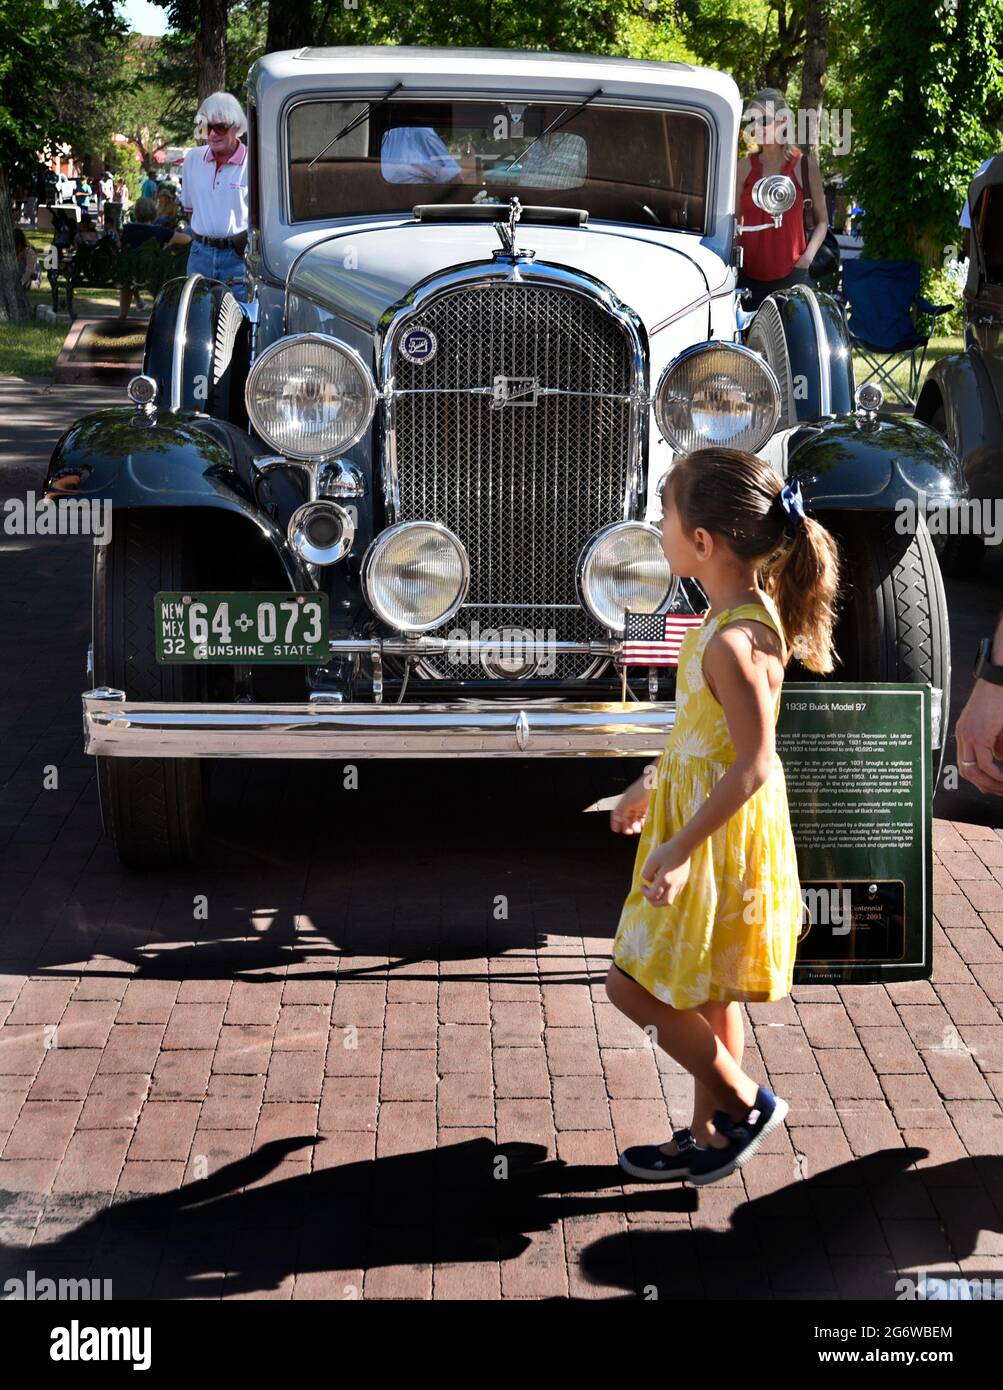 A young girl walks in front of a 1932 Buick sedan on dispay at a car show in Santa Fe, New Mexico. Stock Photo